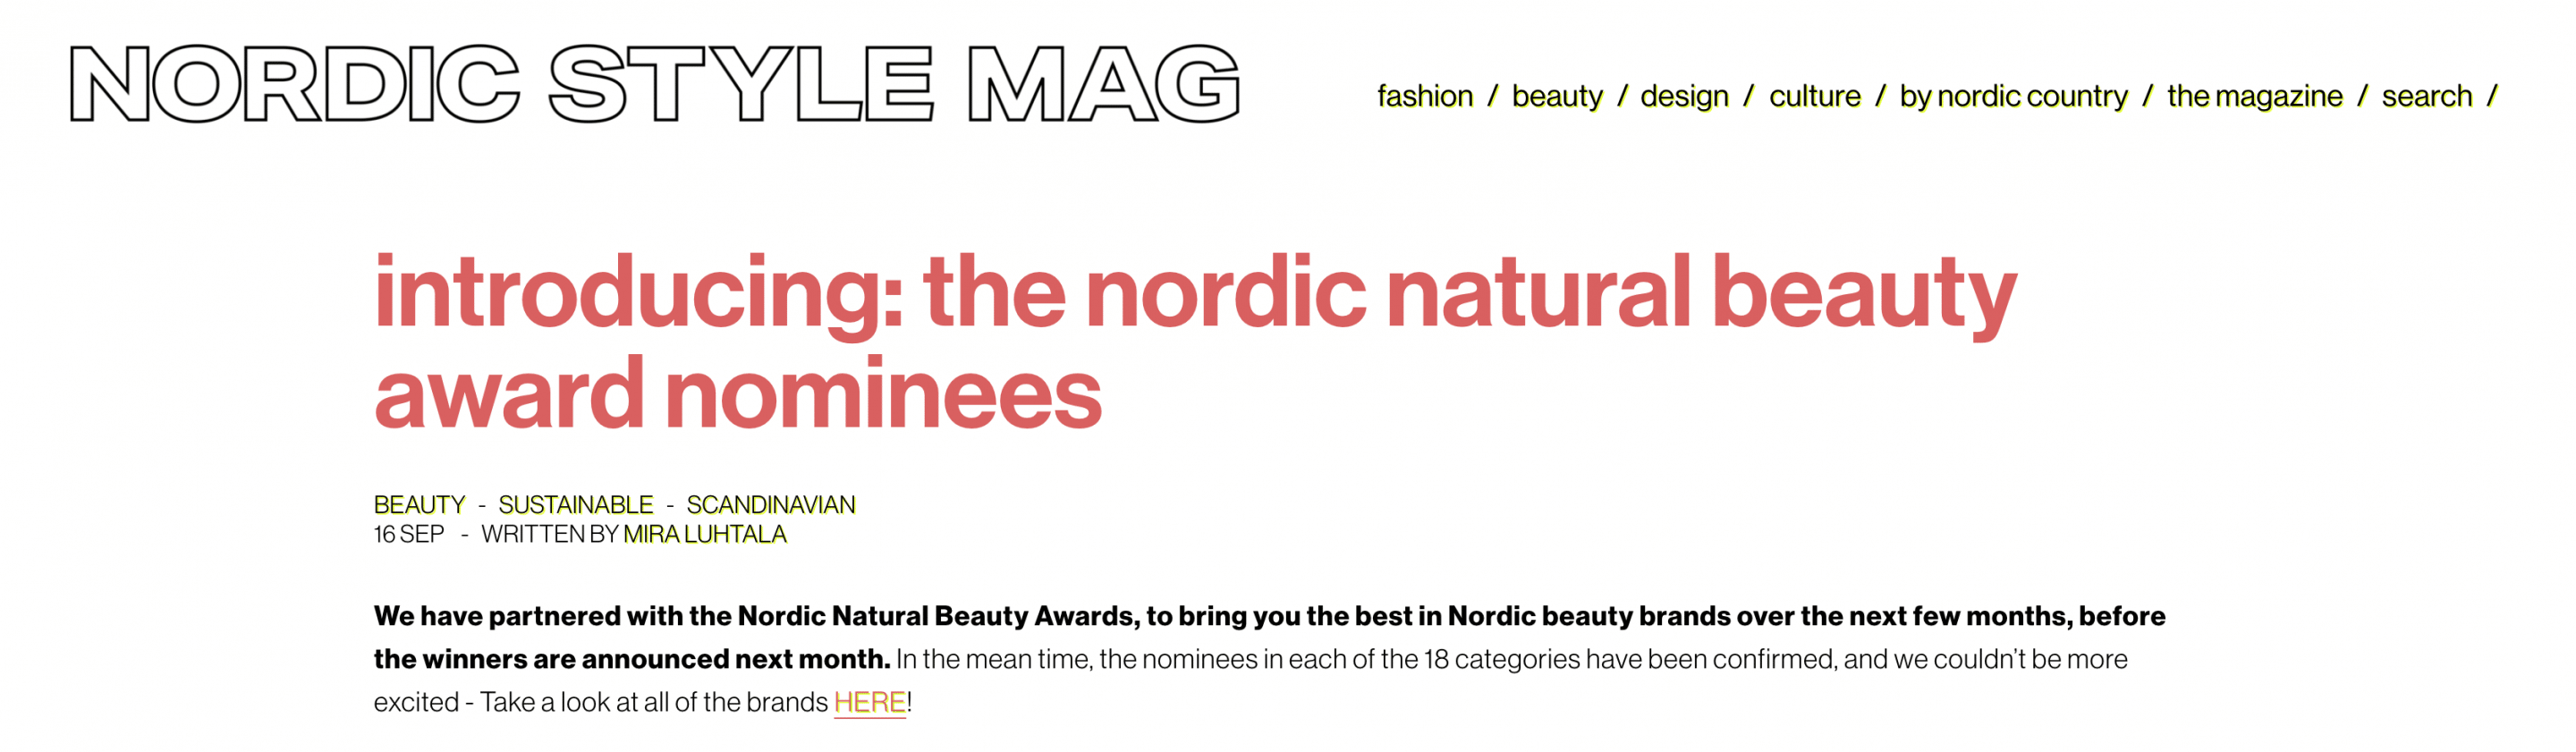 nordic-style-magazine-nordic-natural-beauty-awards